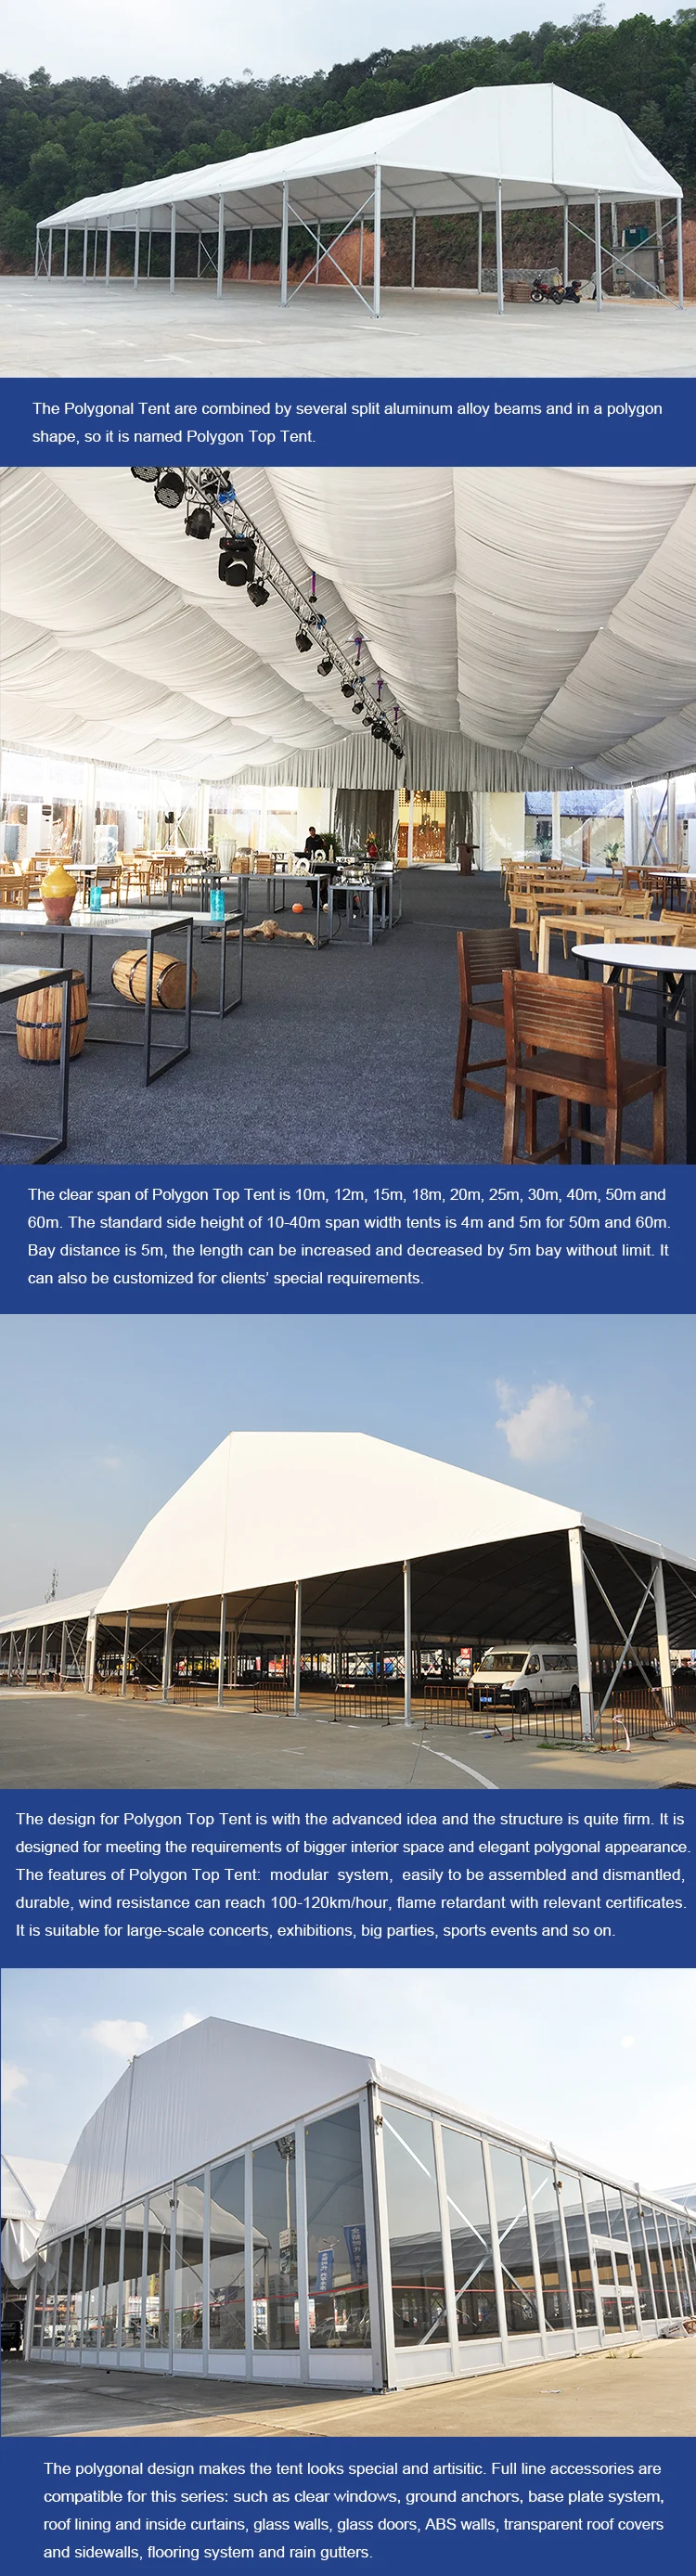 Large Outdoor Event Polygonal Roof Aluminum Structure High Ceiling Tent